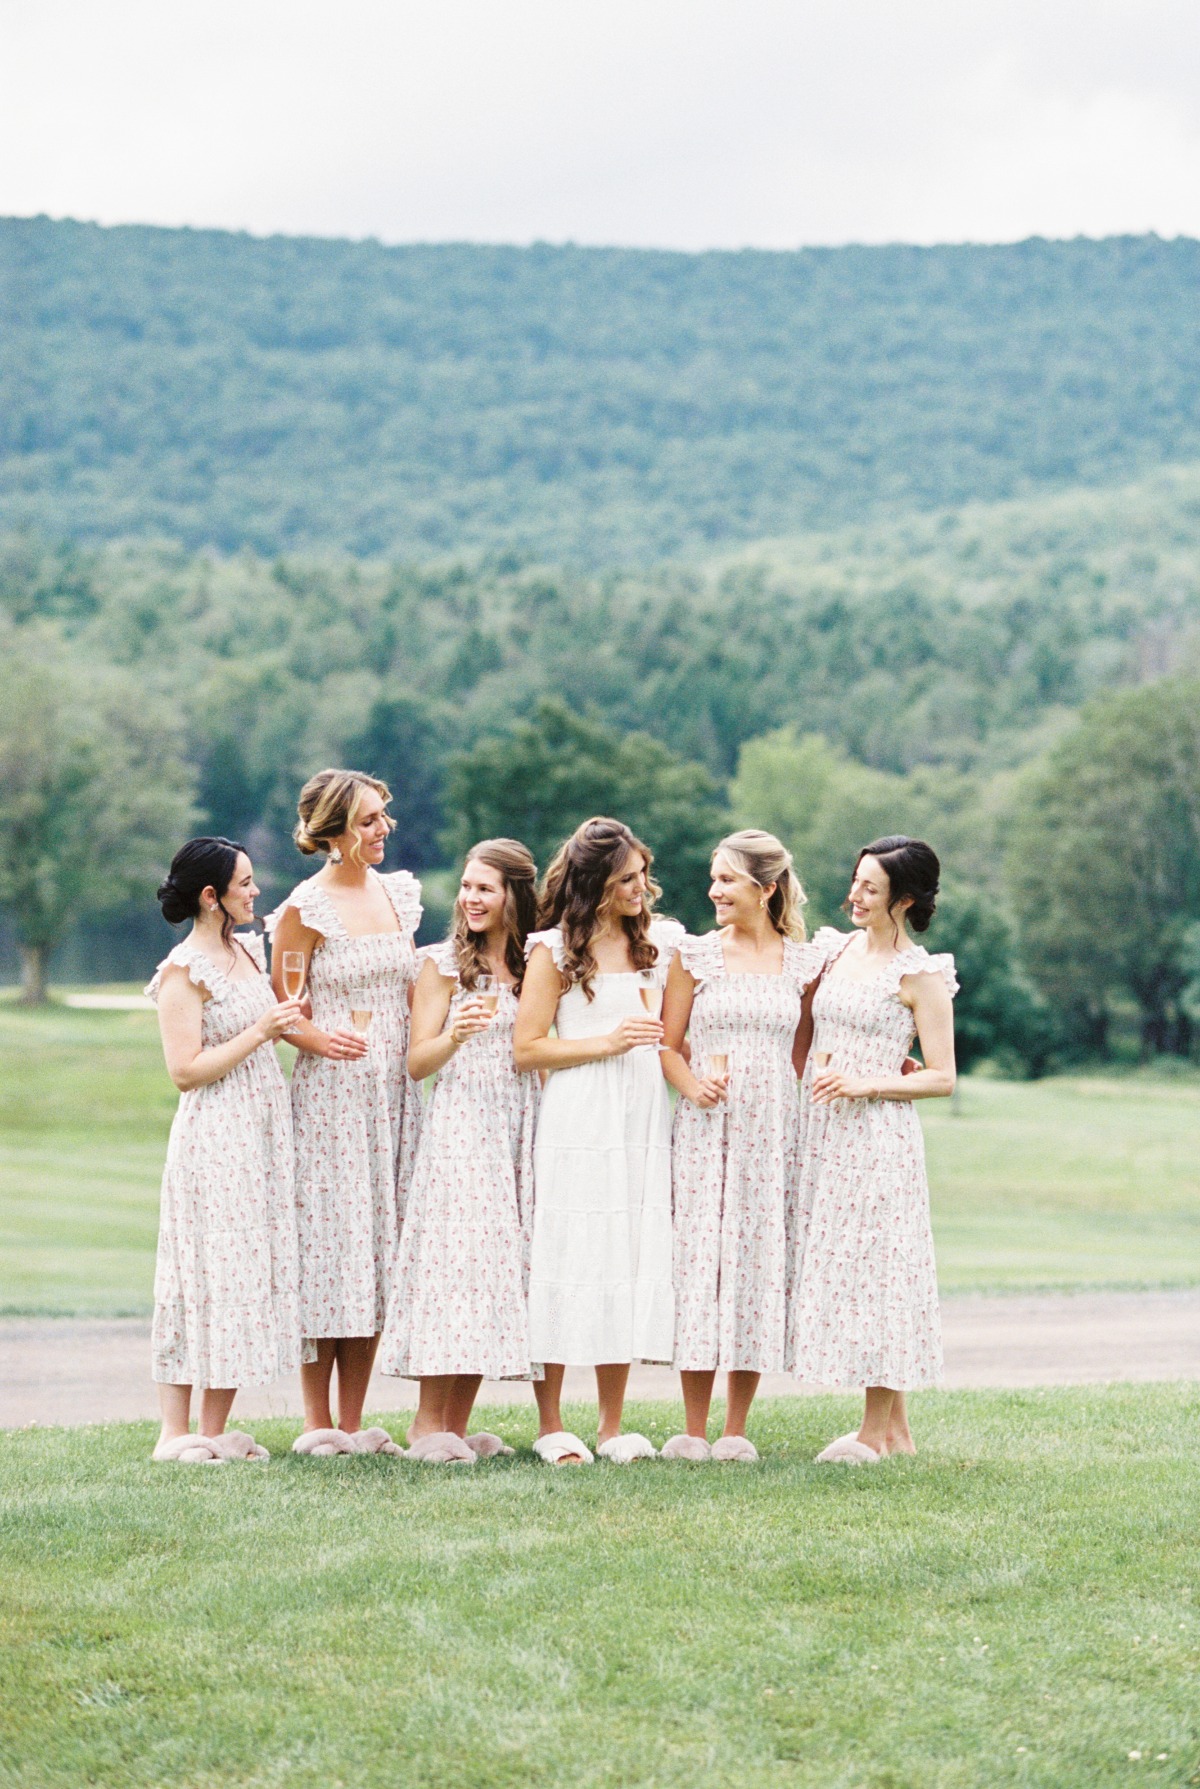 Floral and white bridal party dresses for getting ready 